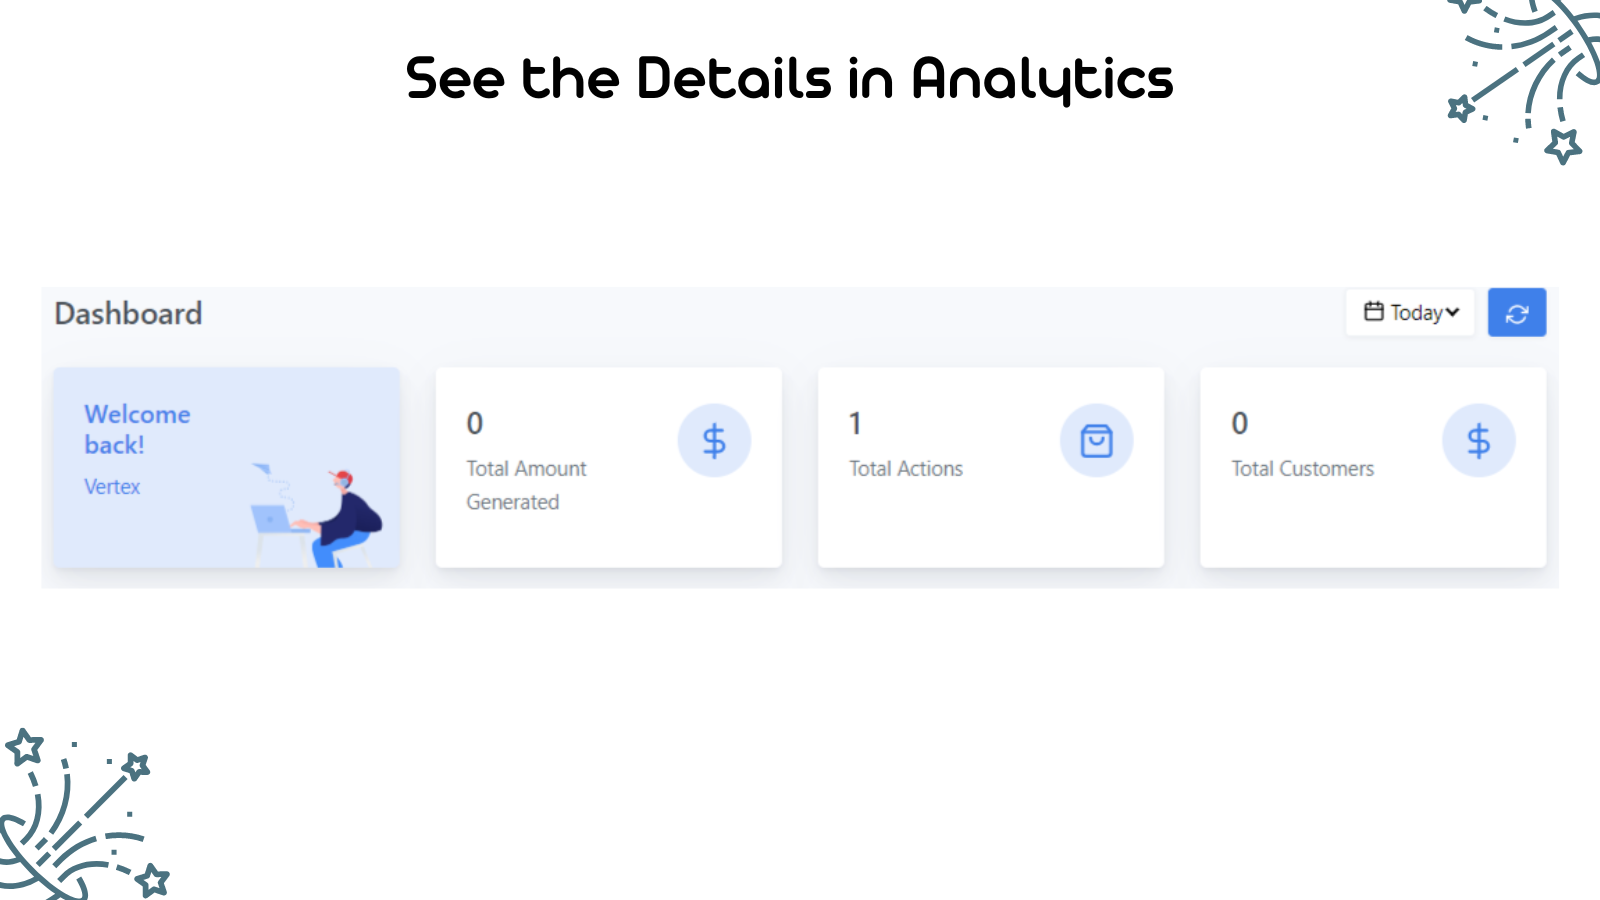 See the Details in Analytics